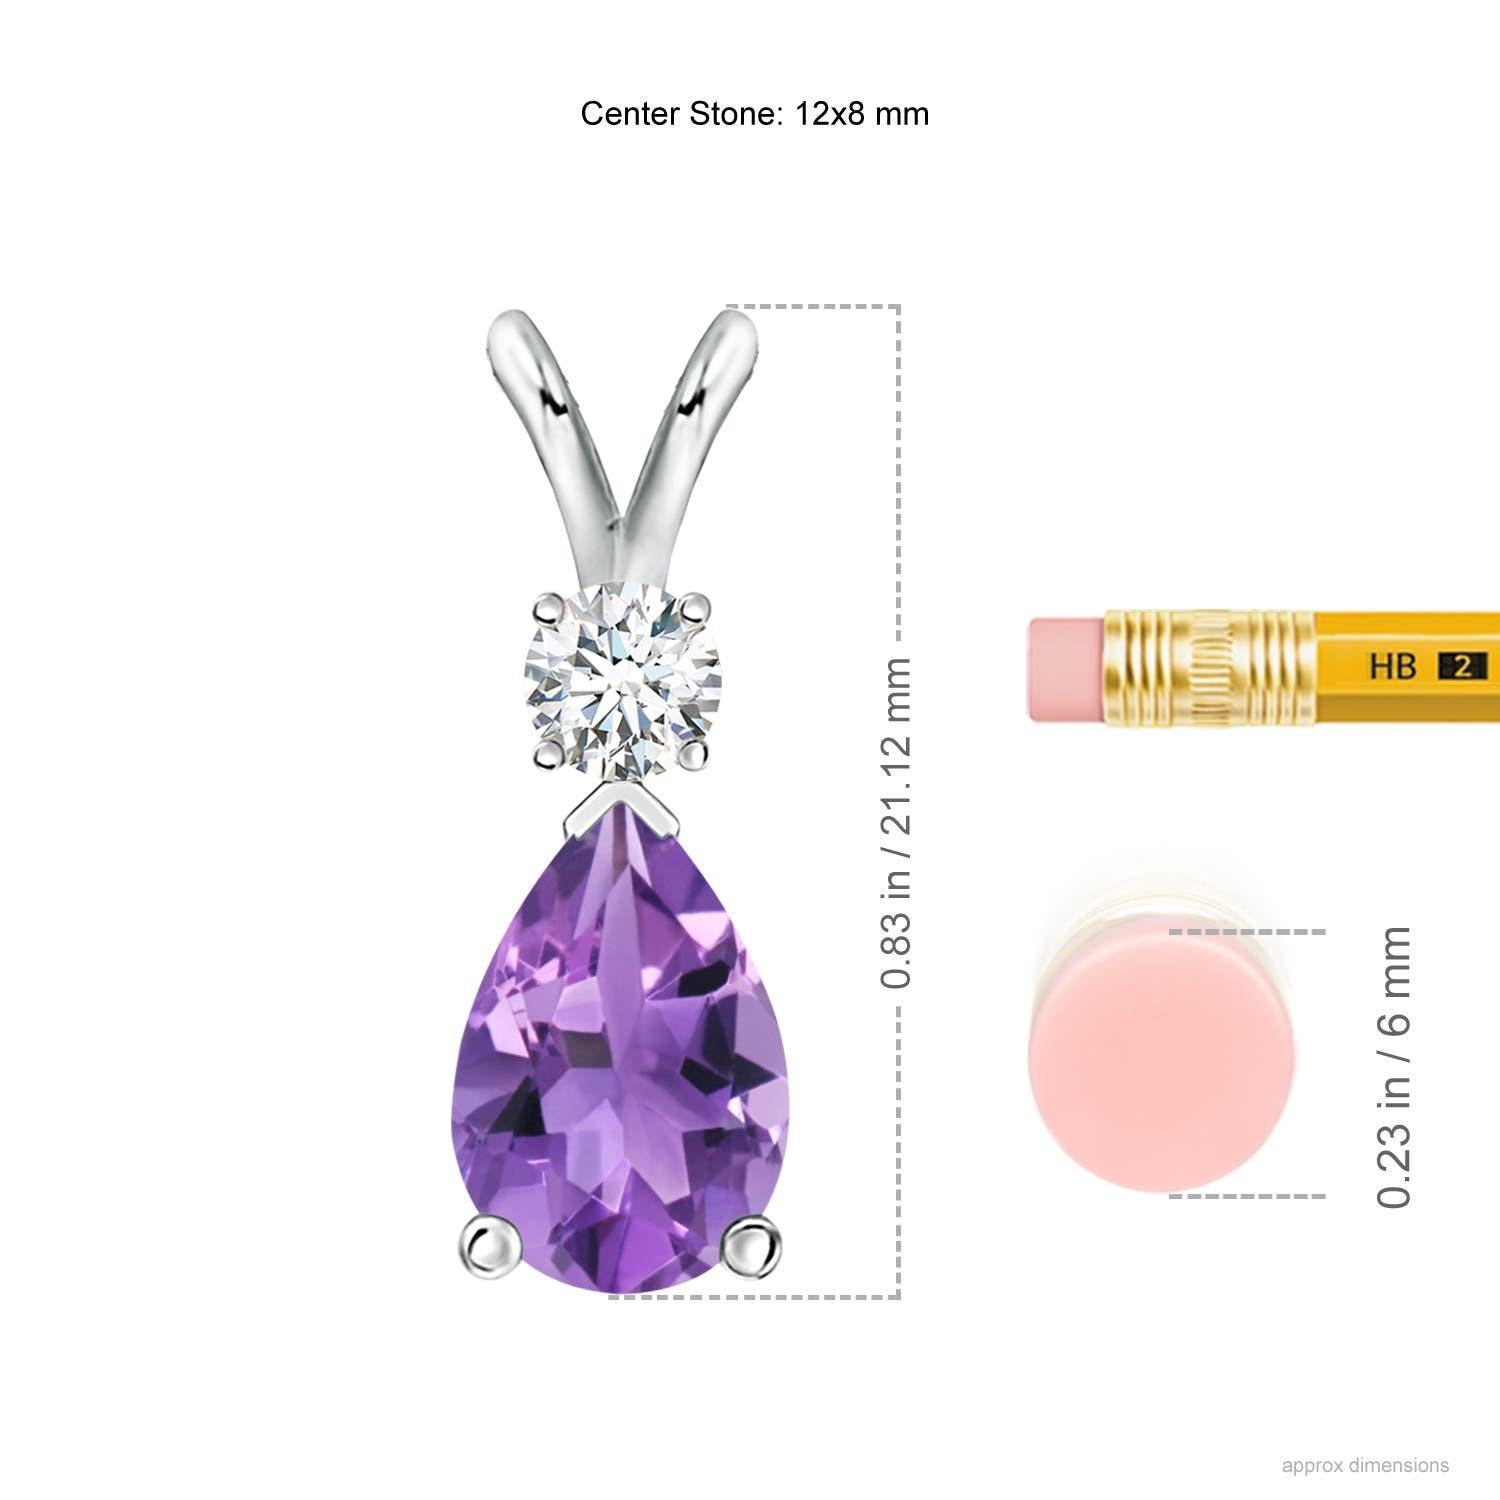 A pear-shaped deep purple amethyst is secured in a prong setting and embellished with a diamond accent on the top. Simple yet stunning, this teardrop amethyst pendant with V bale is sculpted in 14k white gold.
Amethyst is the Birthstone for February